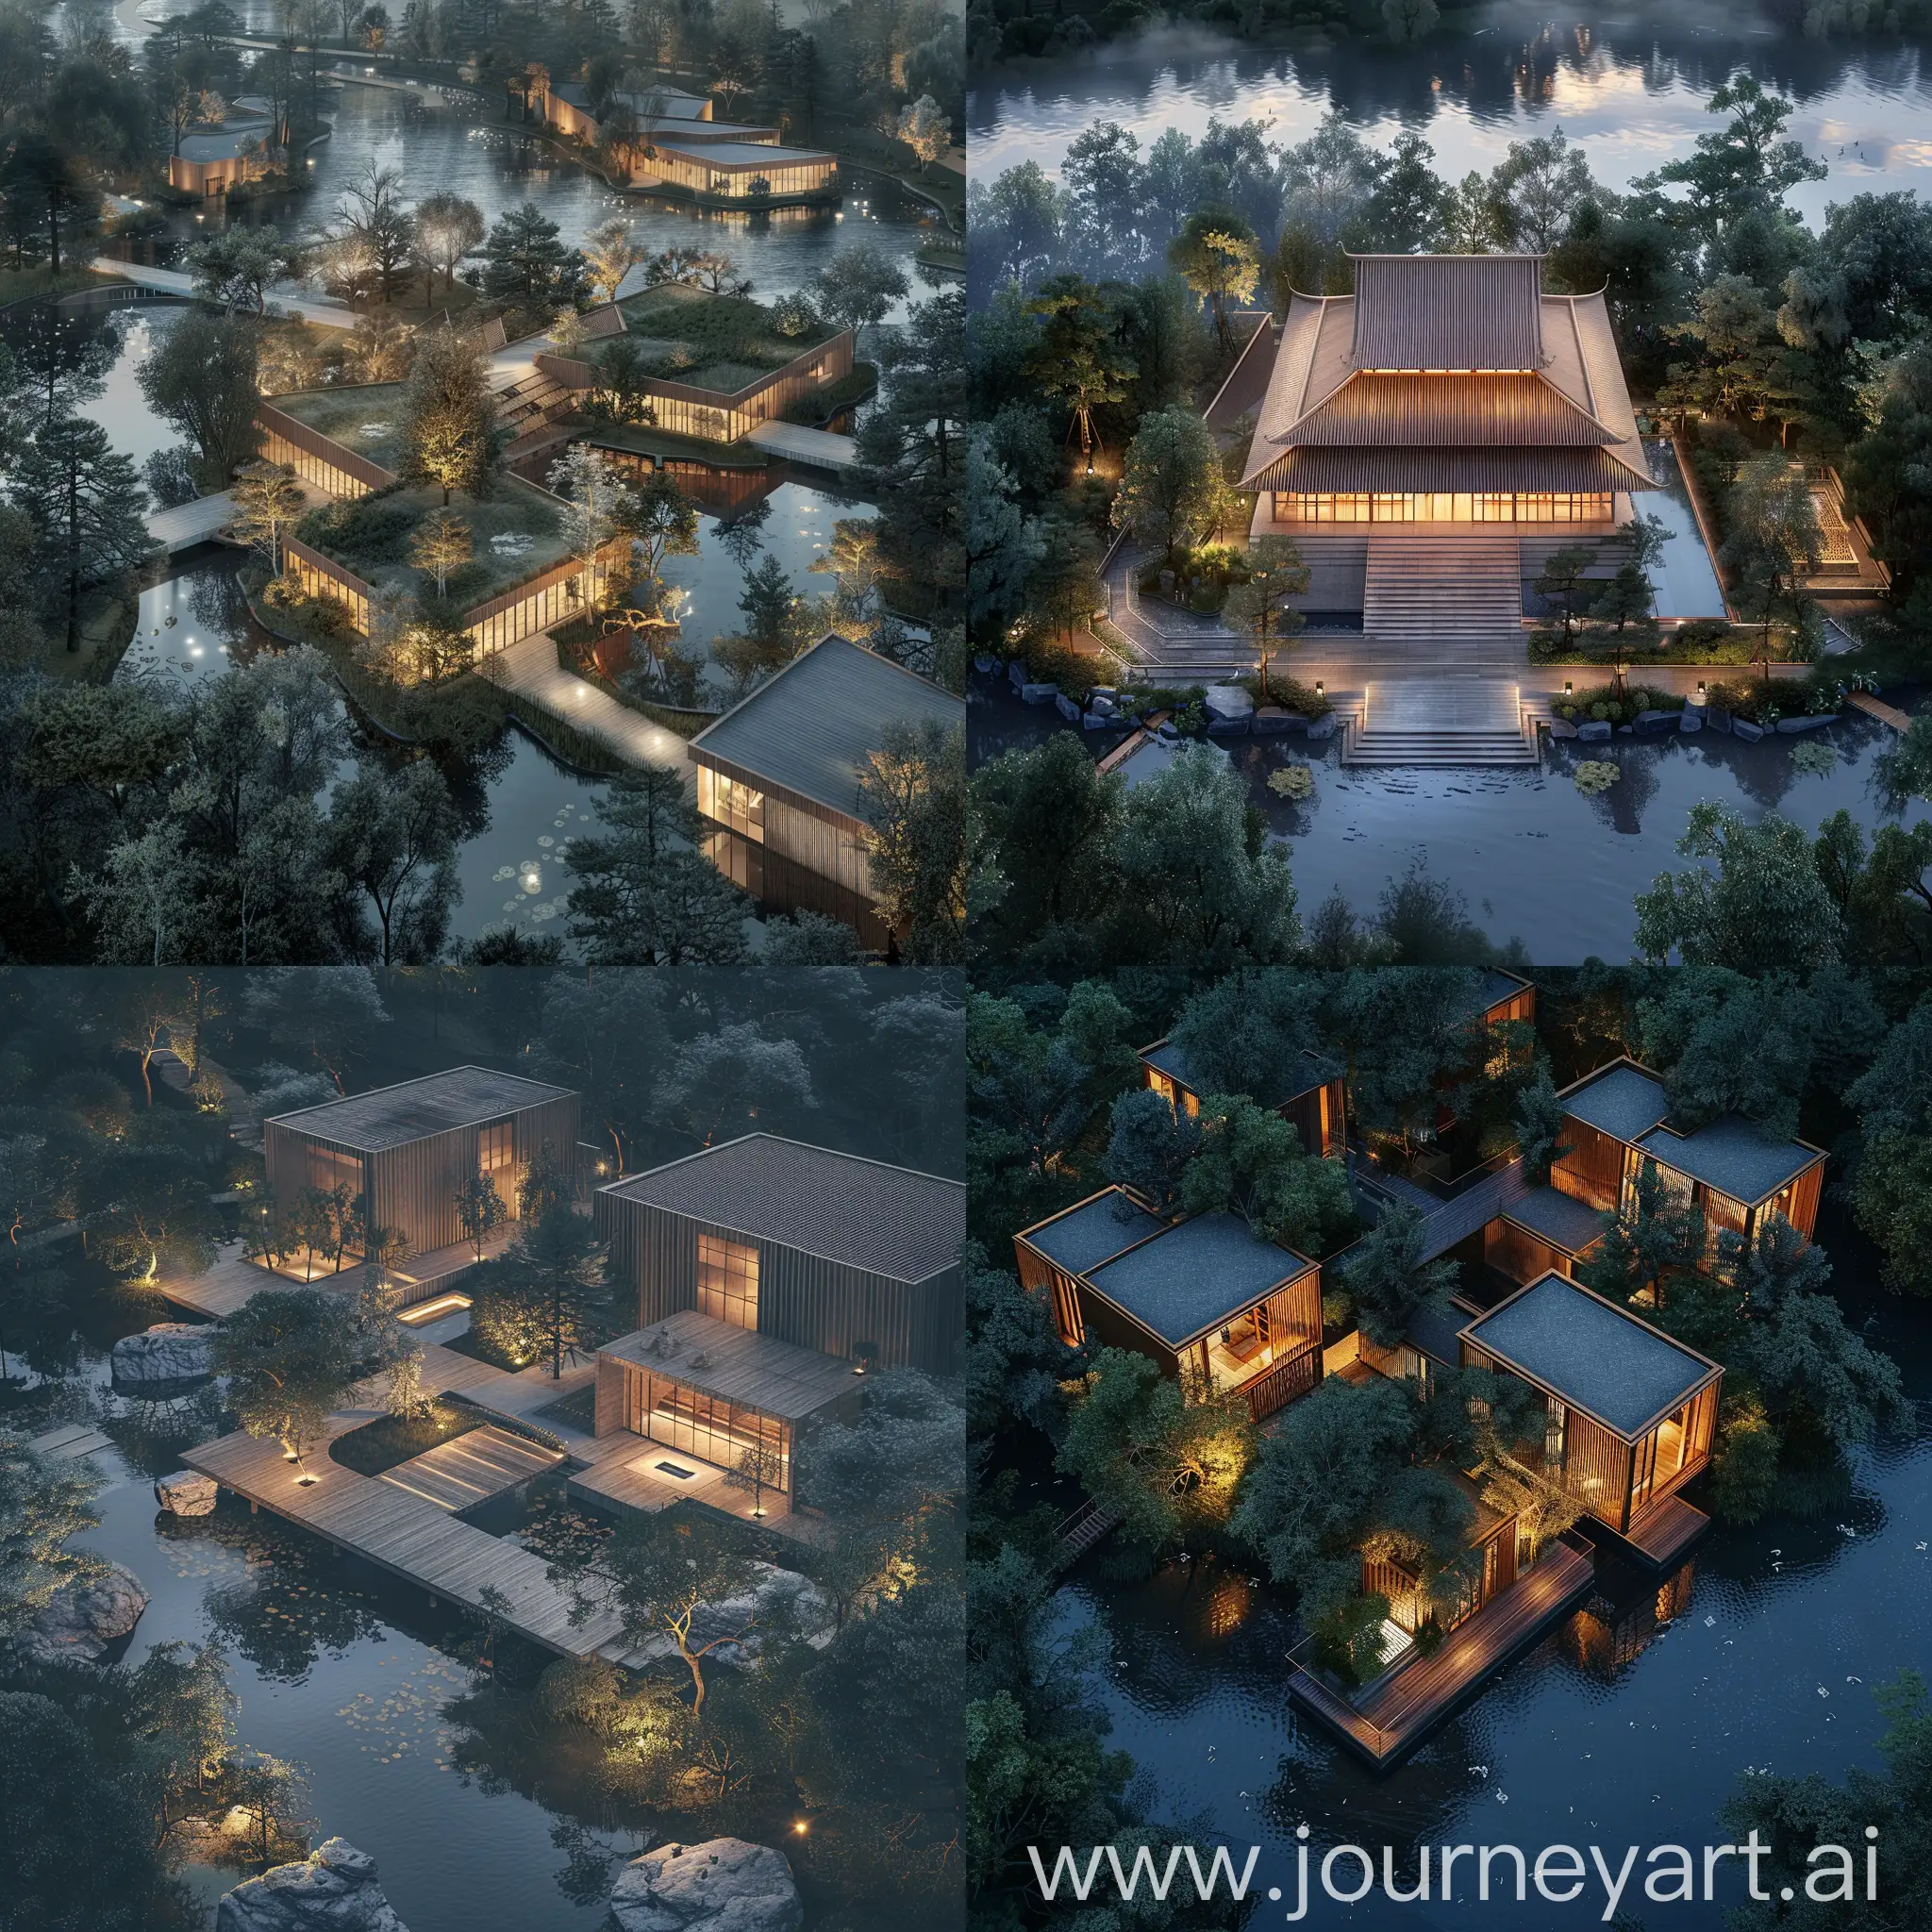 Aerial perspective,Temple Wooden , Riverside, Harmonious Interaction with Nature, Modern and Sustainable Design, Natural Serenity, Soft Ambient Lighting, Parametric forms, Detailed Architectural Rendering, Earth Tones and Natural Hues, High-Resolution Architectural Visualization, Realistic Quality, Environmental Consciousness